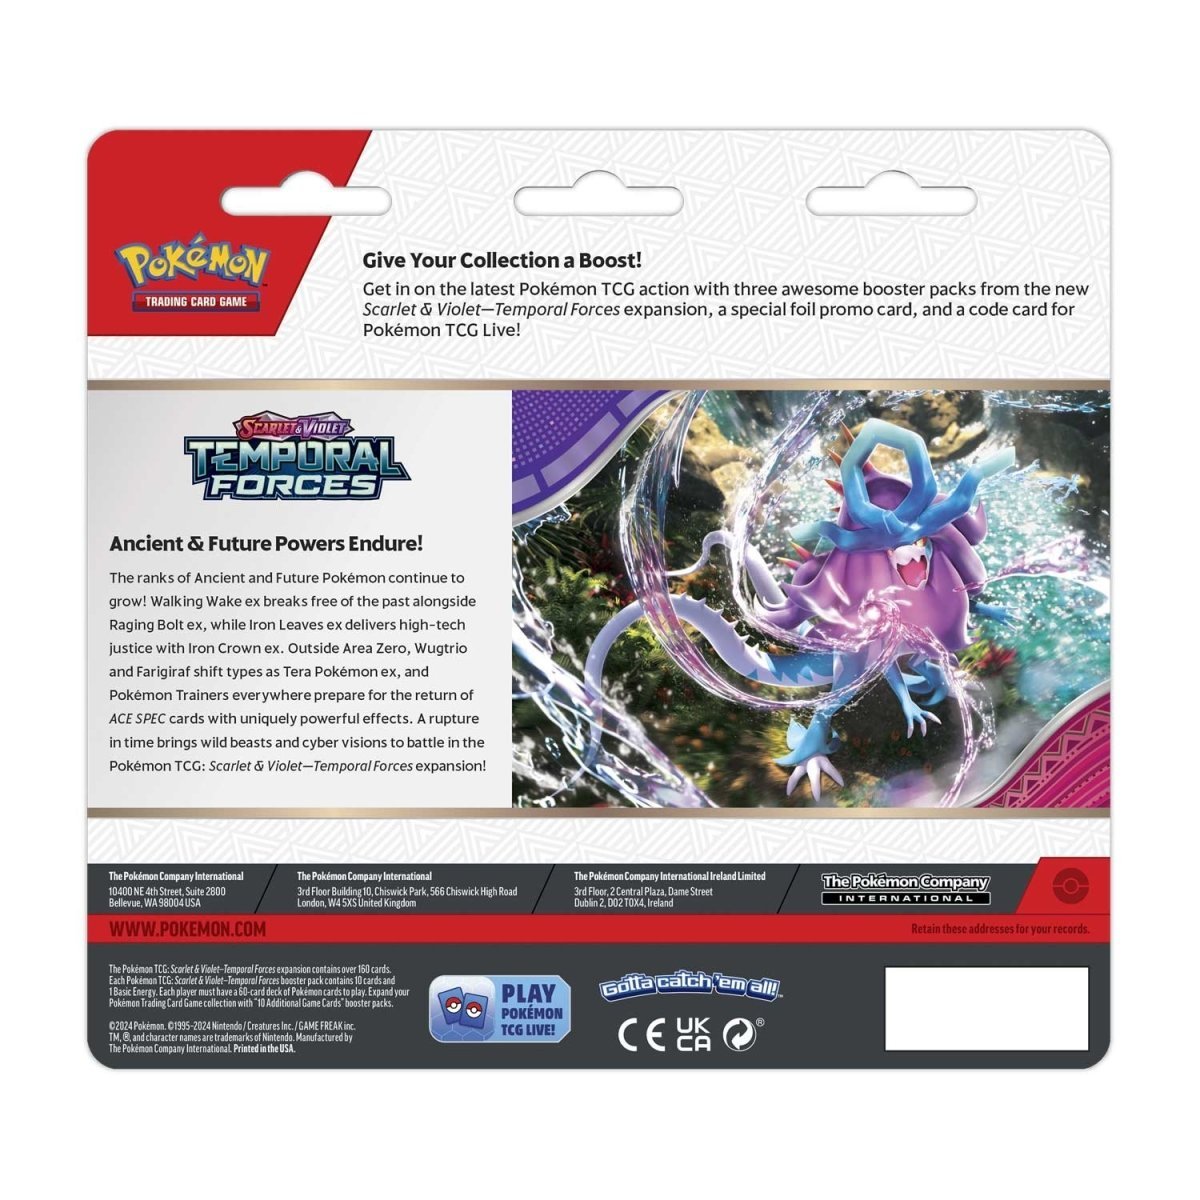 Pokémon TCG: SV - Temporal Forces 3 Booster Blister Pack (Cleffa) - PokeRvmblister pack